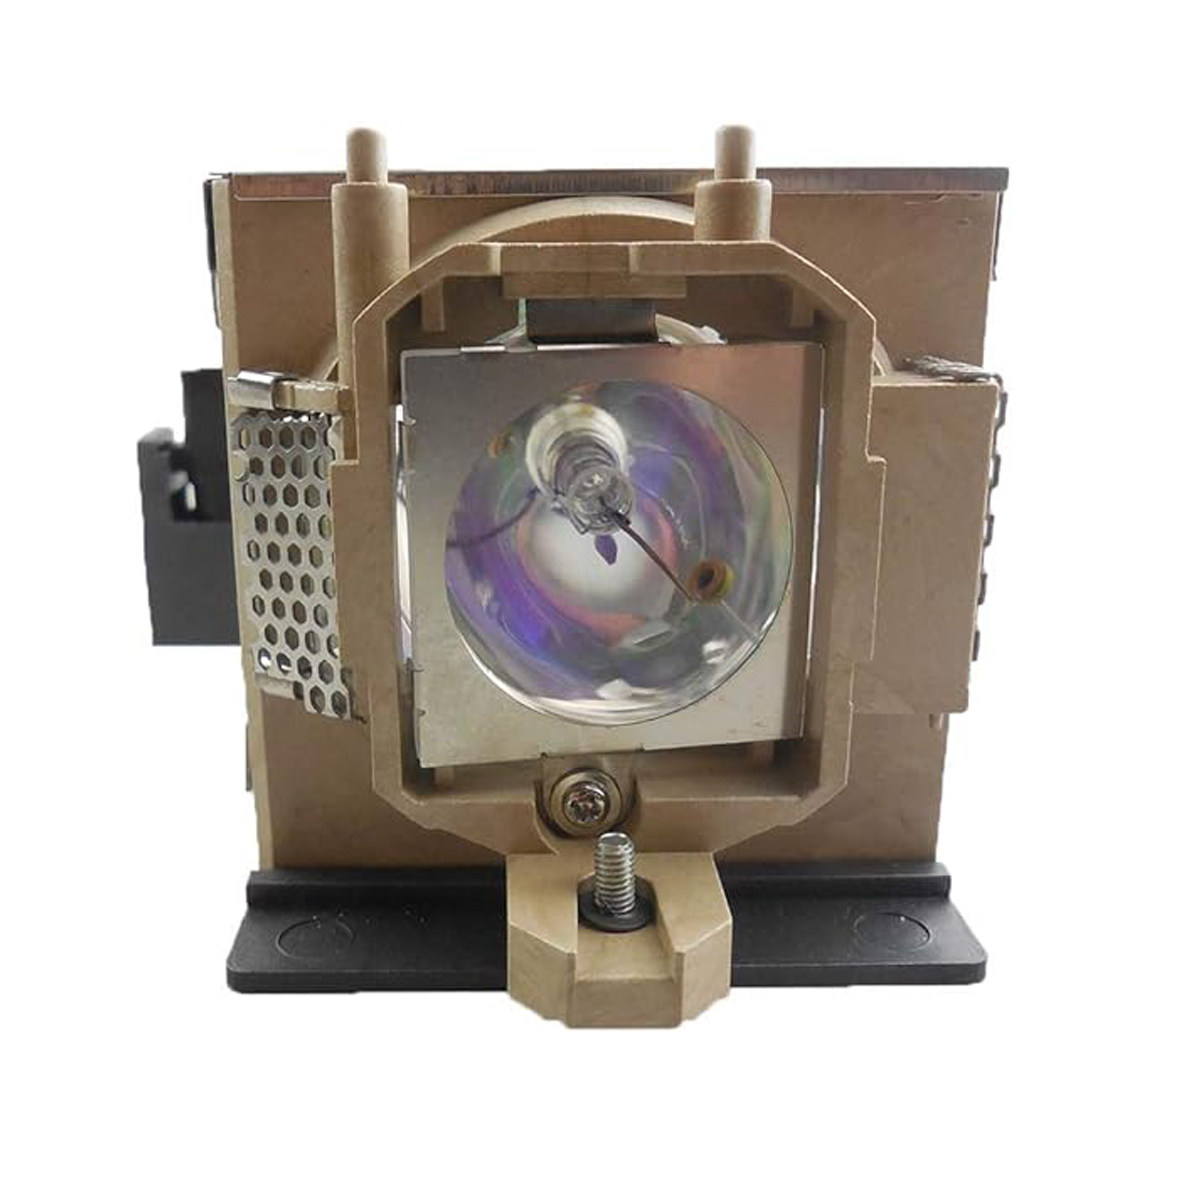 Replacement Projector lamp L1755A For HEWLETT PACKARD VP6200 VP6210 VP6220